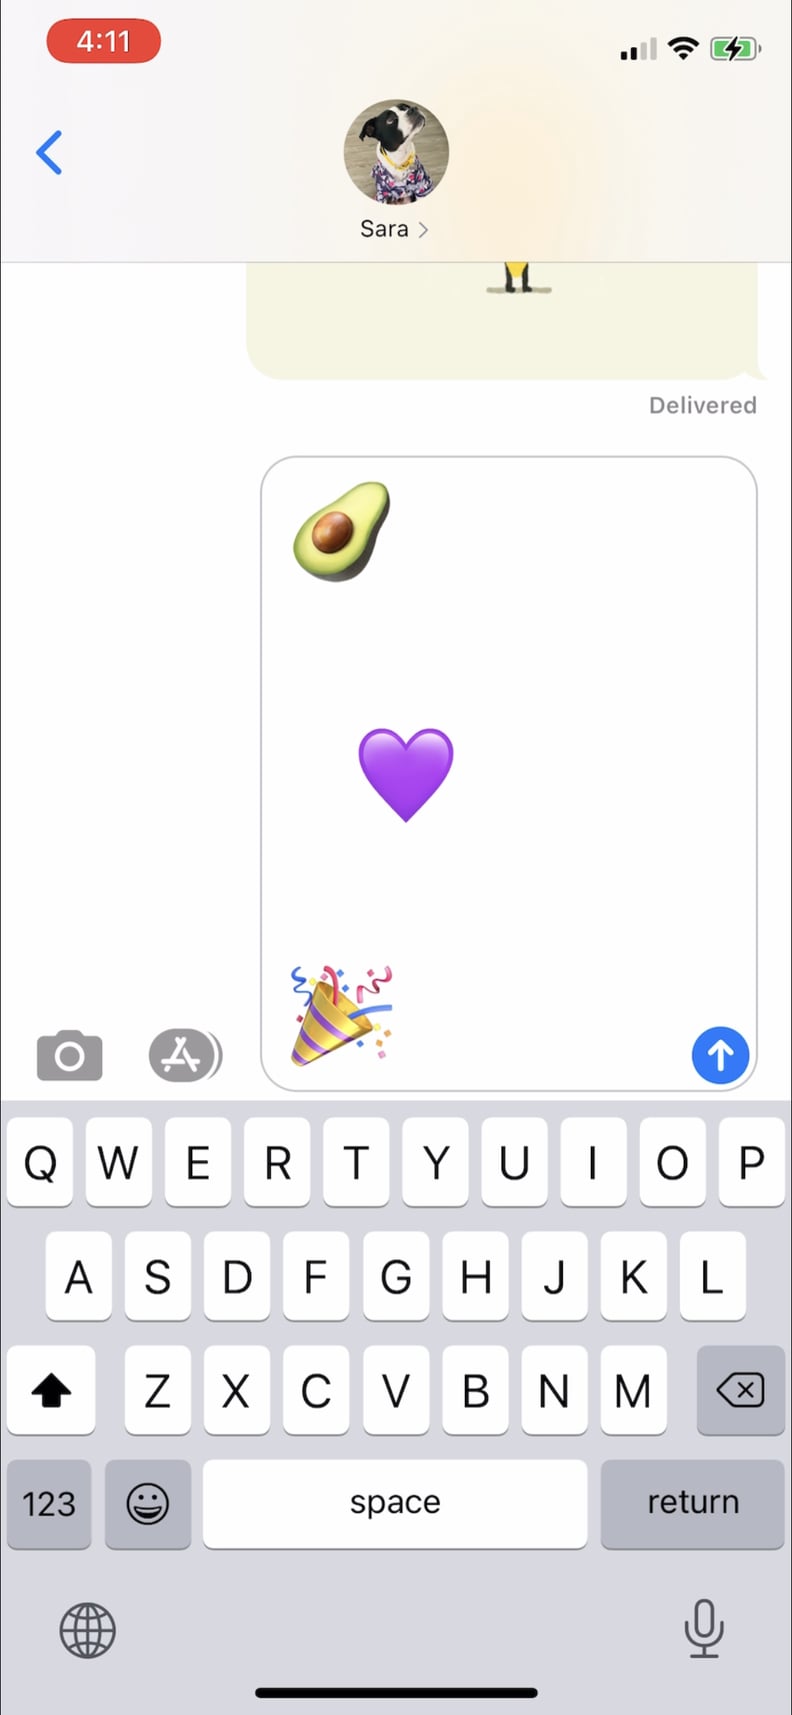 Step 2: Space Out the Emoji Like So